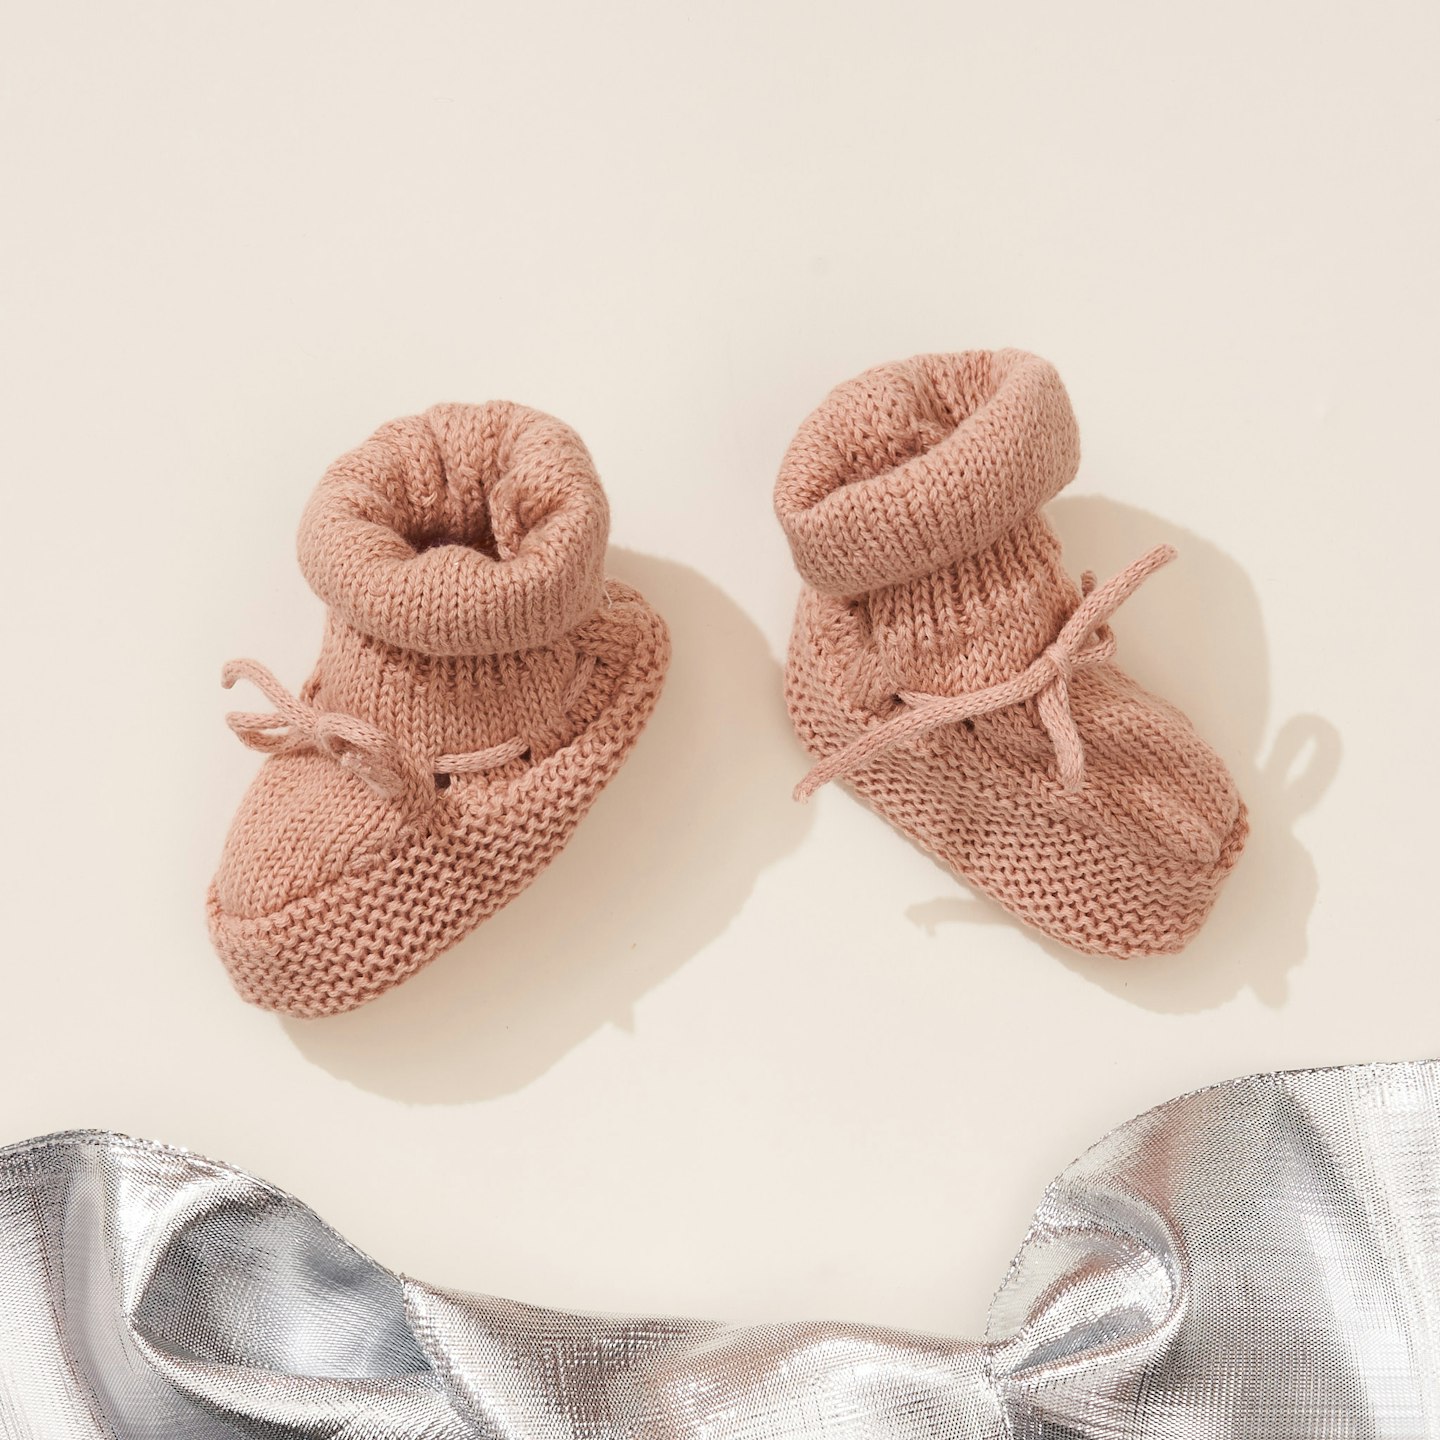 Knitted Baby Booties, Katie Loxton